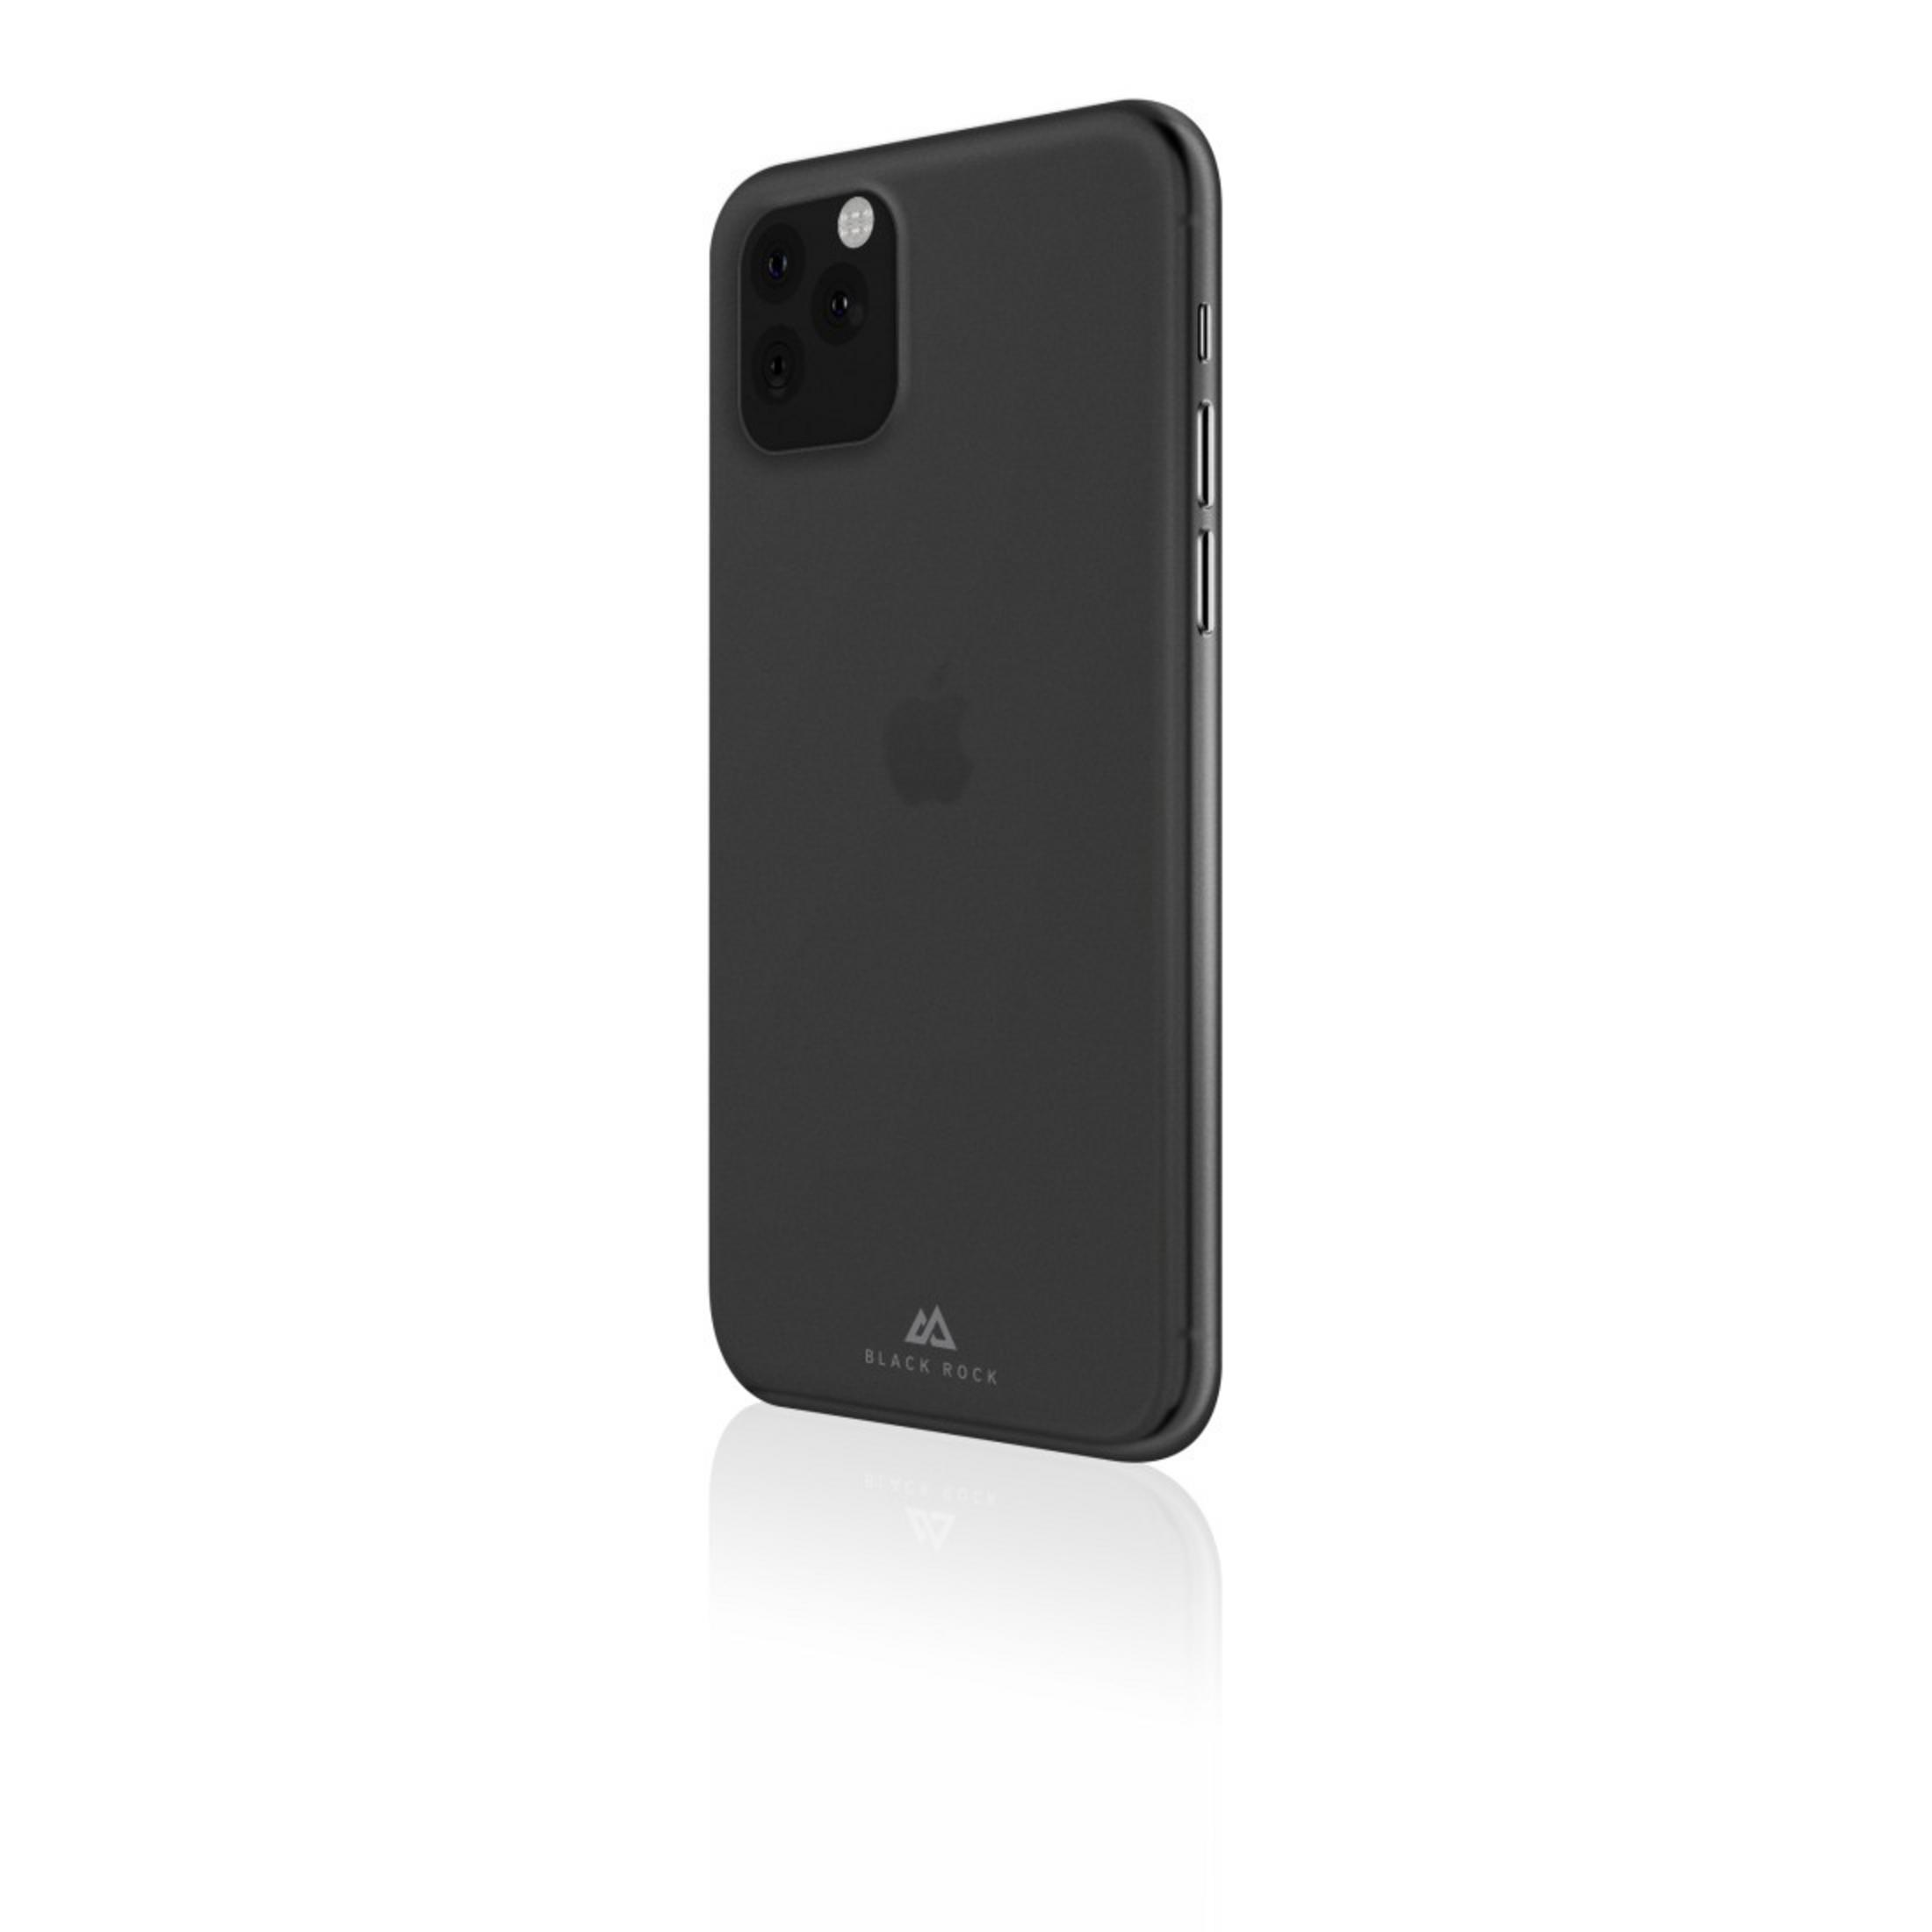 ROCK IPH 187005 Apple, Schwarz BLACK 11 ULT.TH.ICED SW, CO Backcover, 11, iPhone